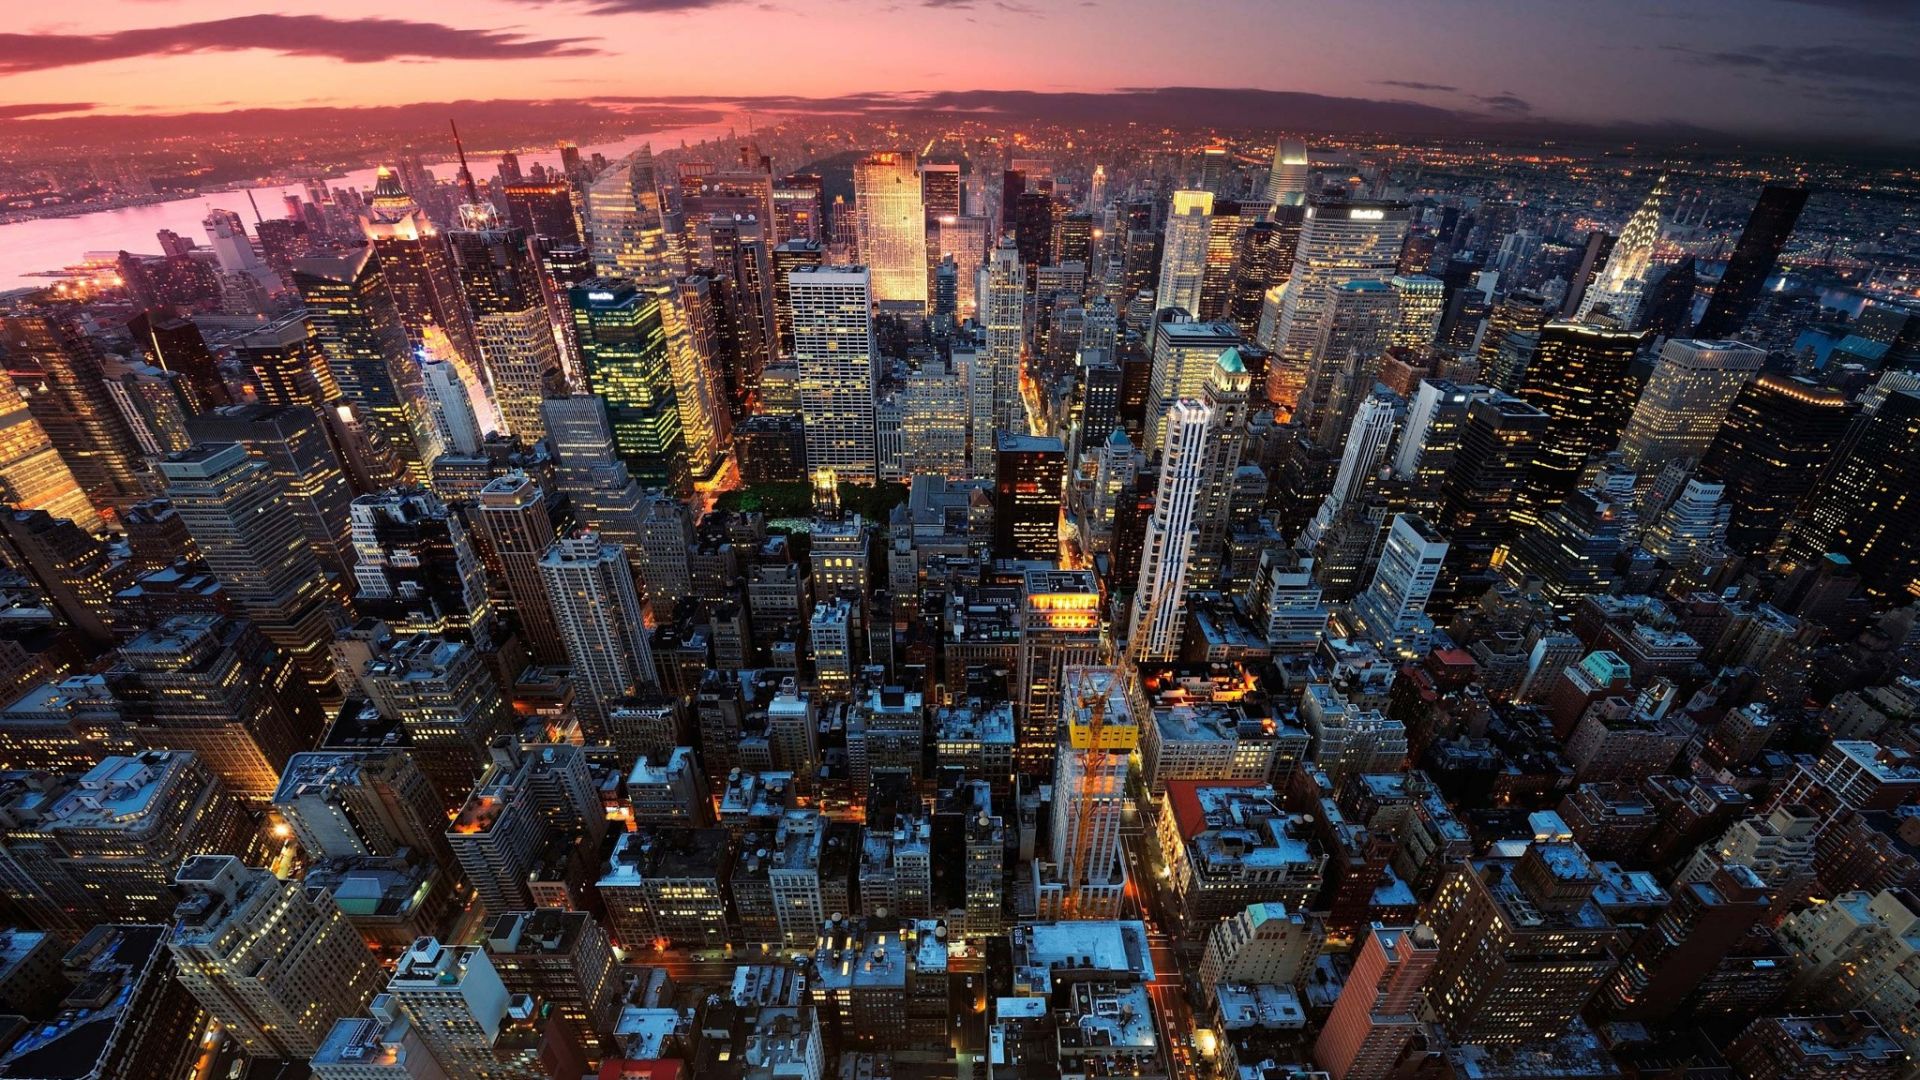 Desktop Wallpaper New York, Aerial View, City, Night, Skyscrapers,  Buildings, Hd Image, Picture, Background, Nlmowv